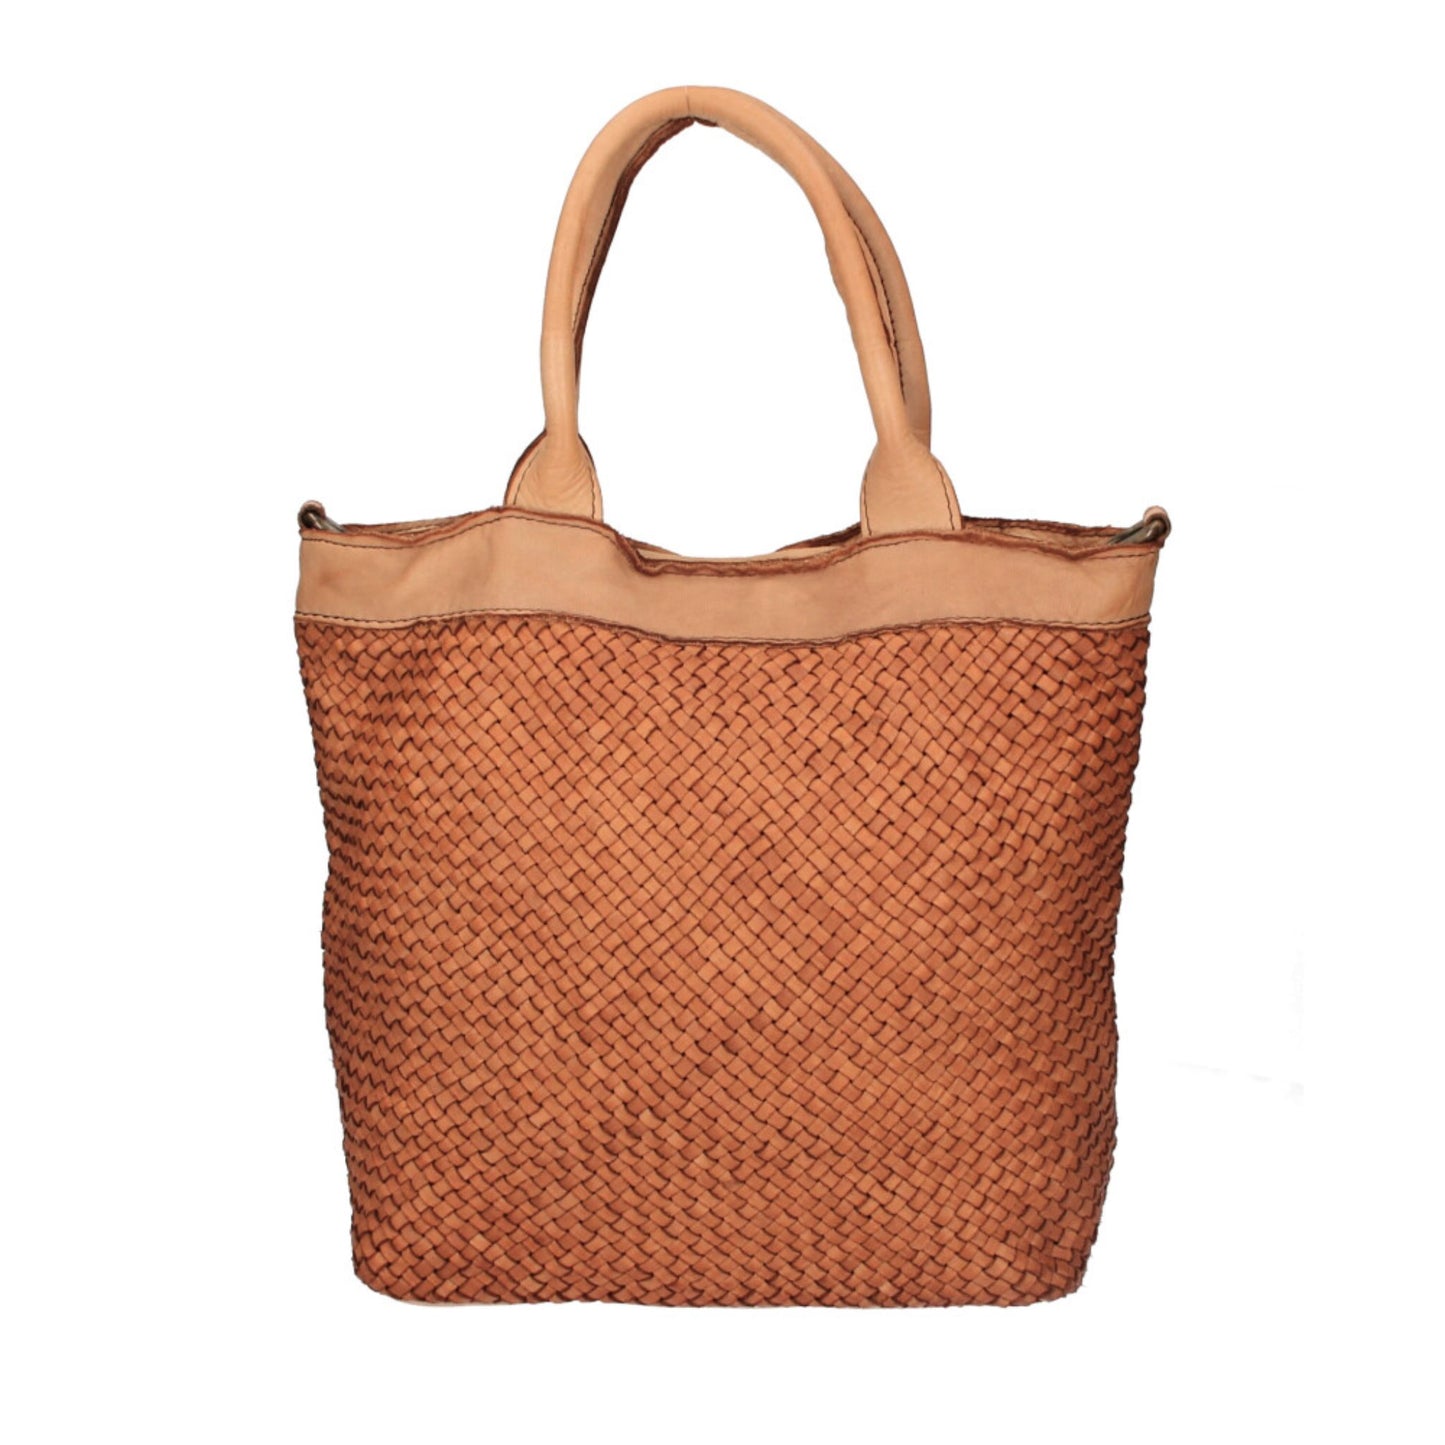 The Woven Leather Tote Bag